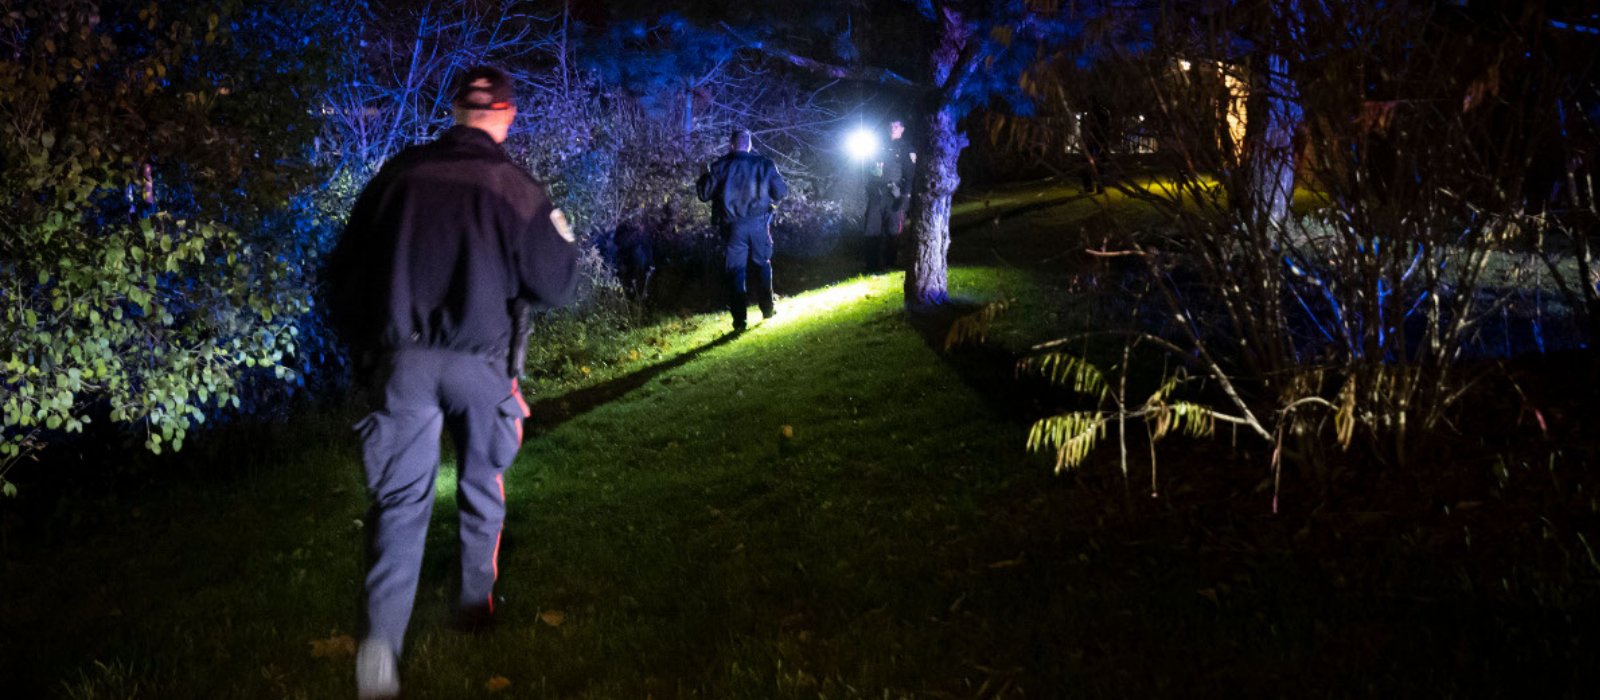 Officers search for the missing party